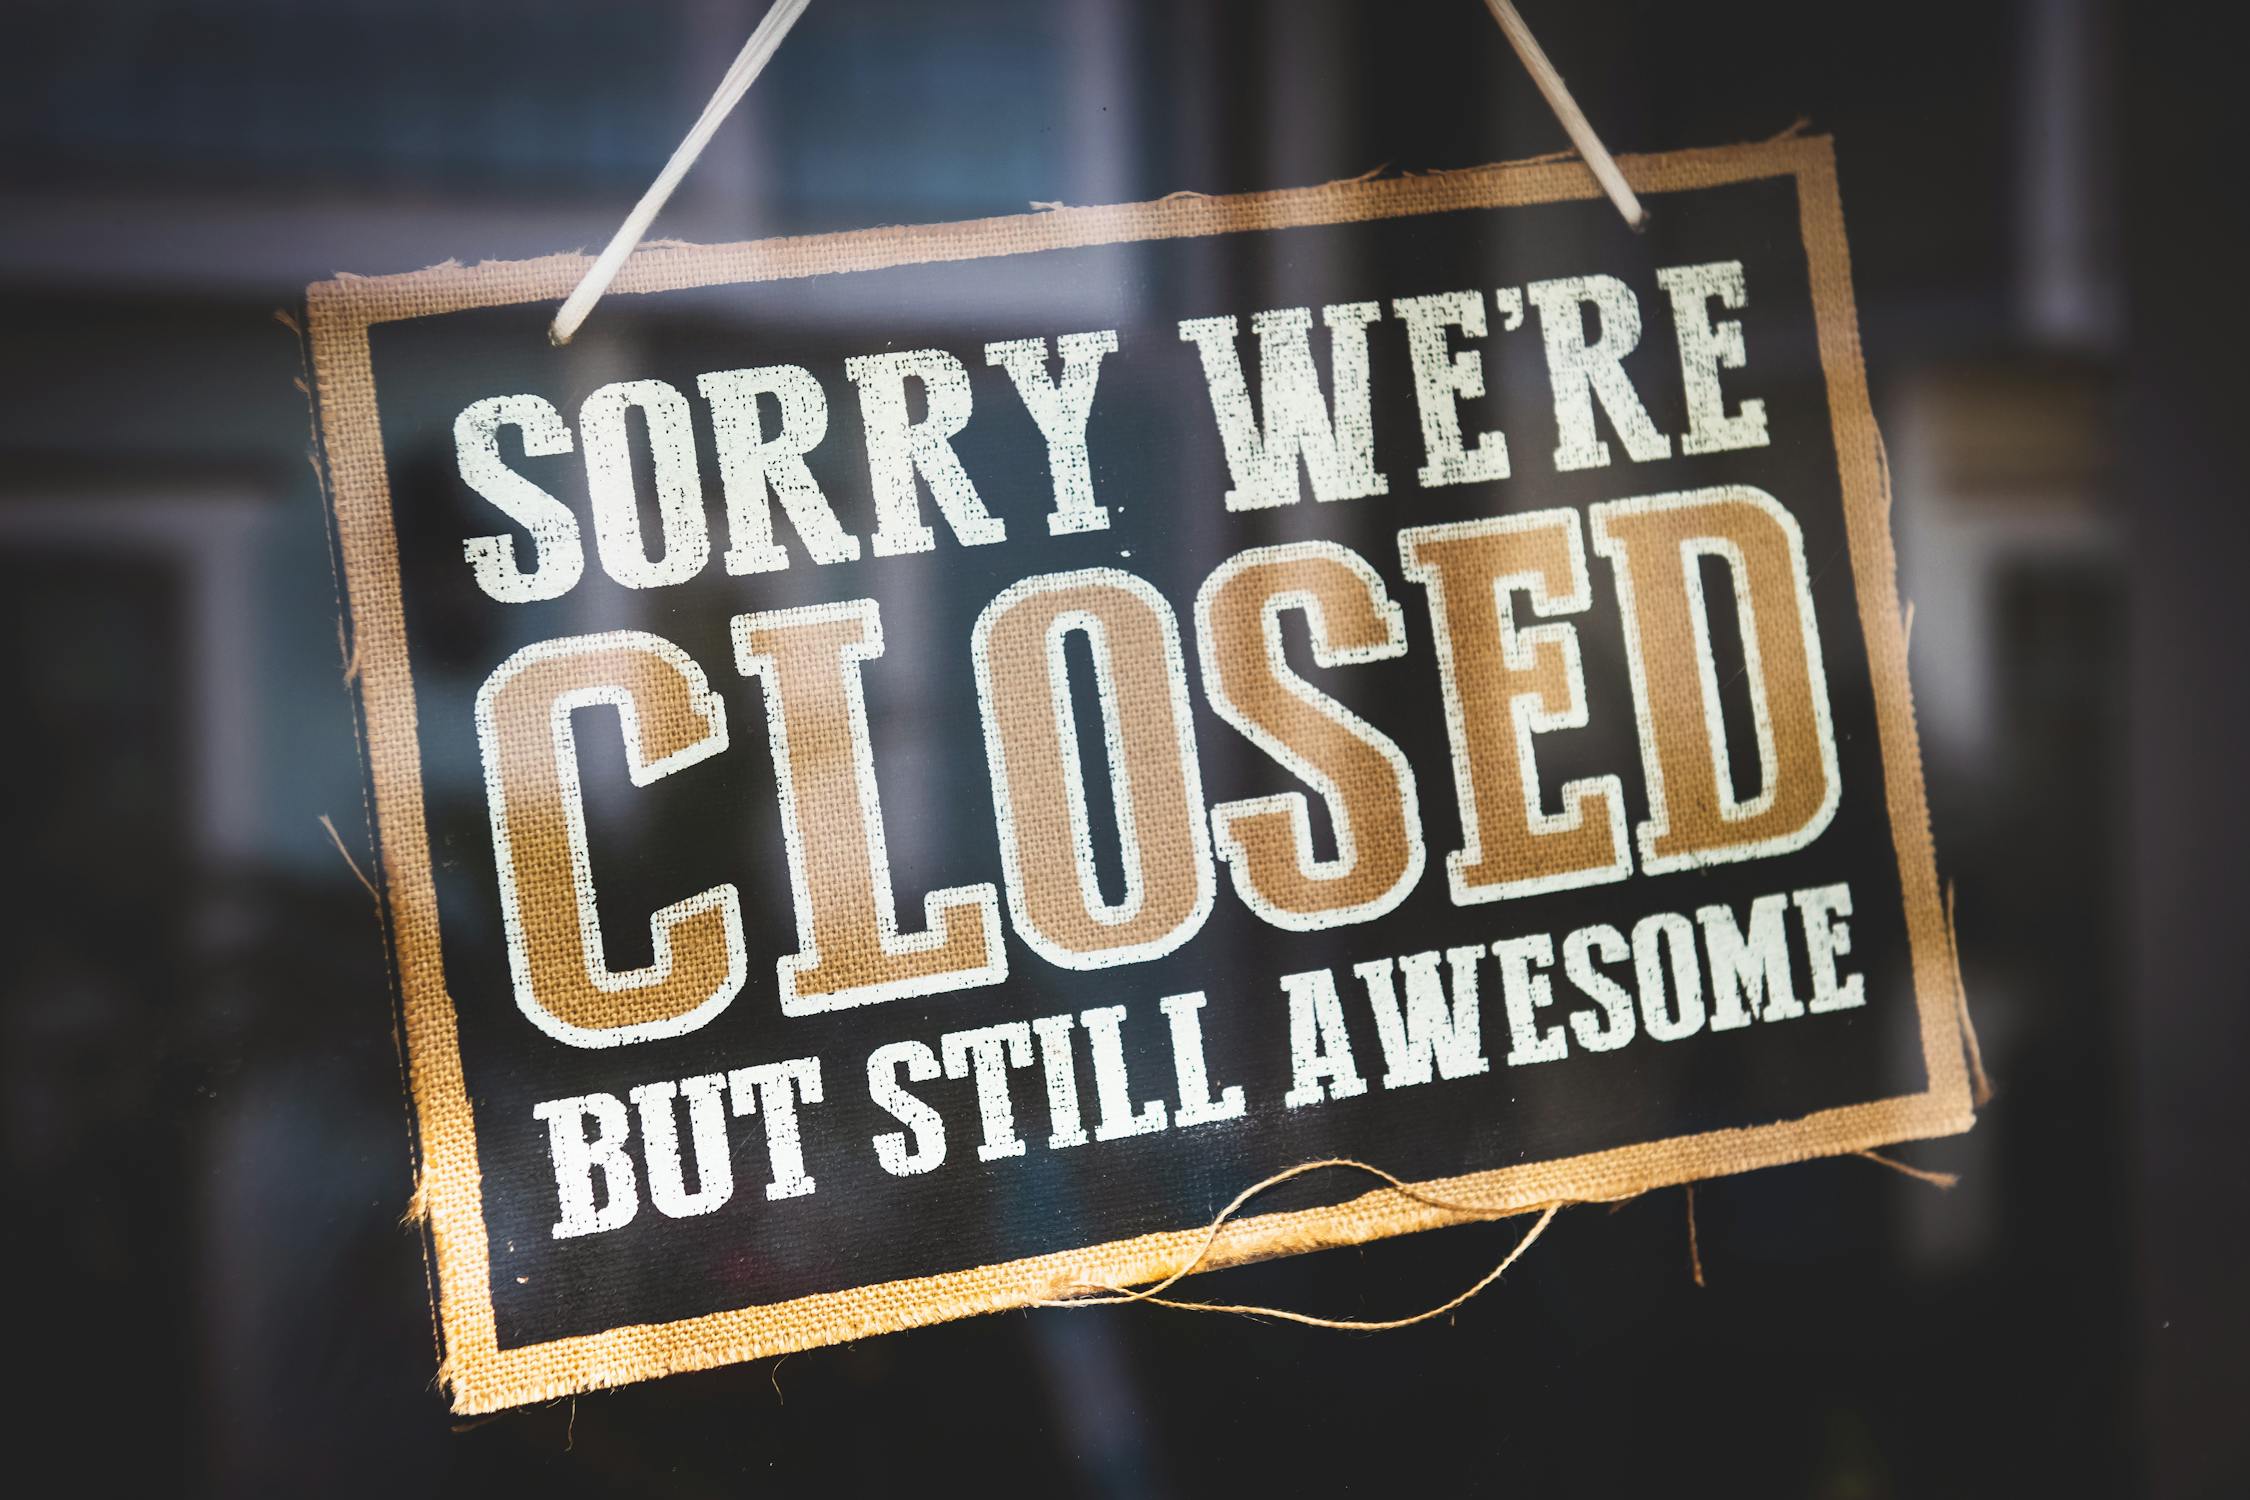 sorry-we-re-closed-but-still-awesome-tag-free-stock-photo